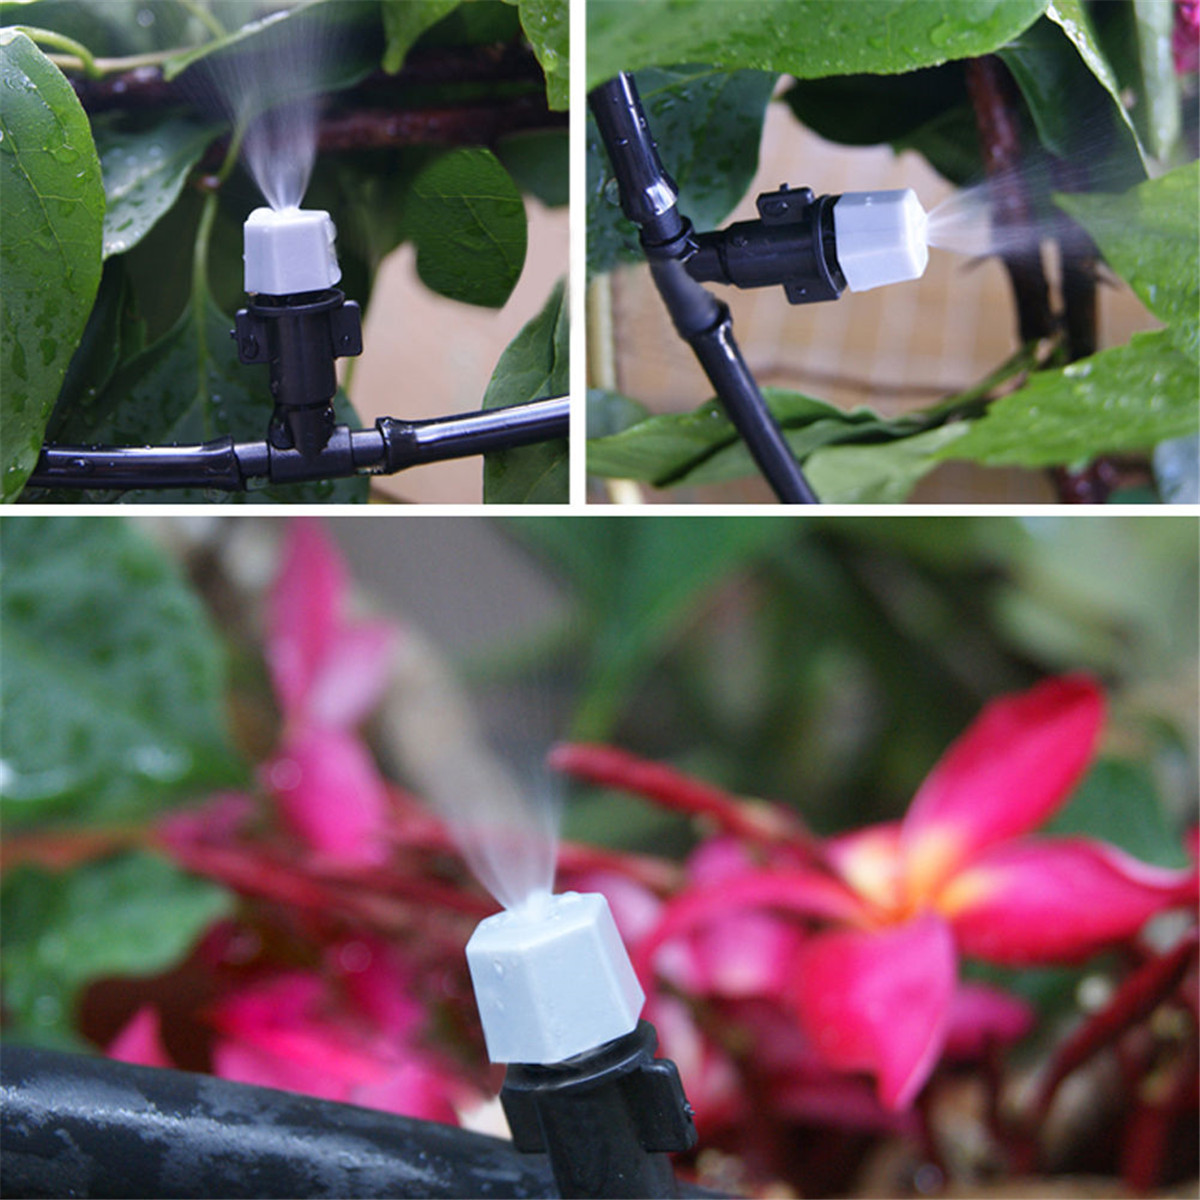 Garden-Patio-Water-Misting-Cooling-System-Lawn-Sprinkler-Nozzle-Micro-Irrigation-Set-1341314